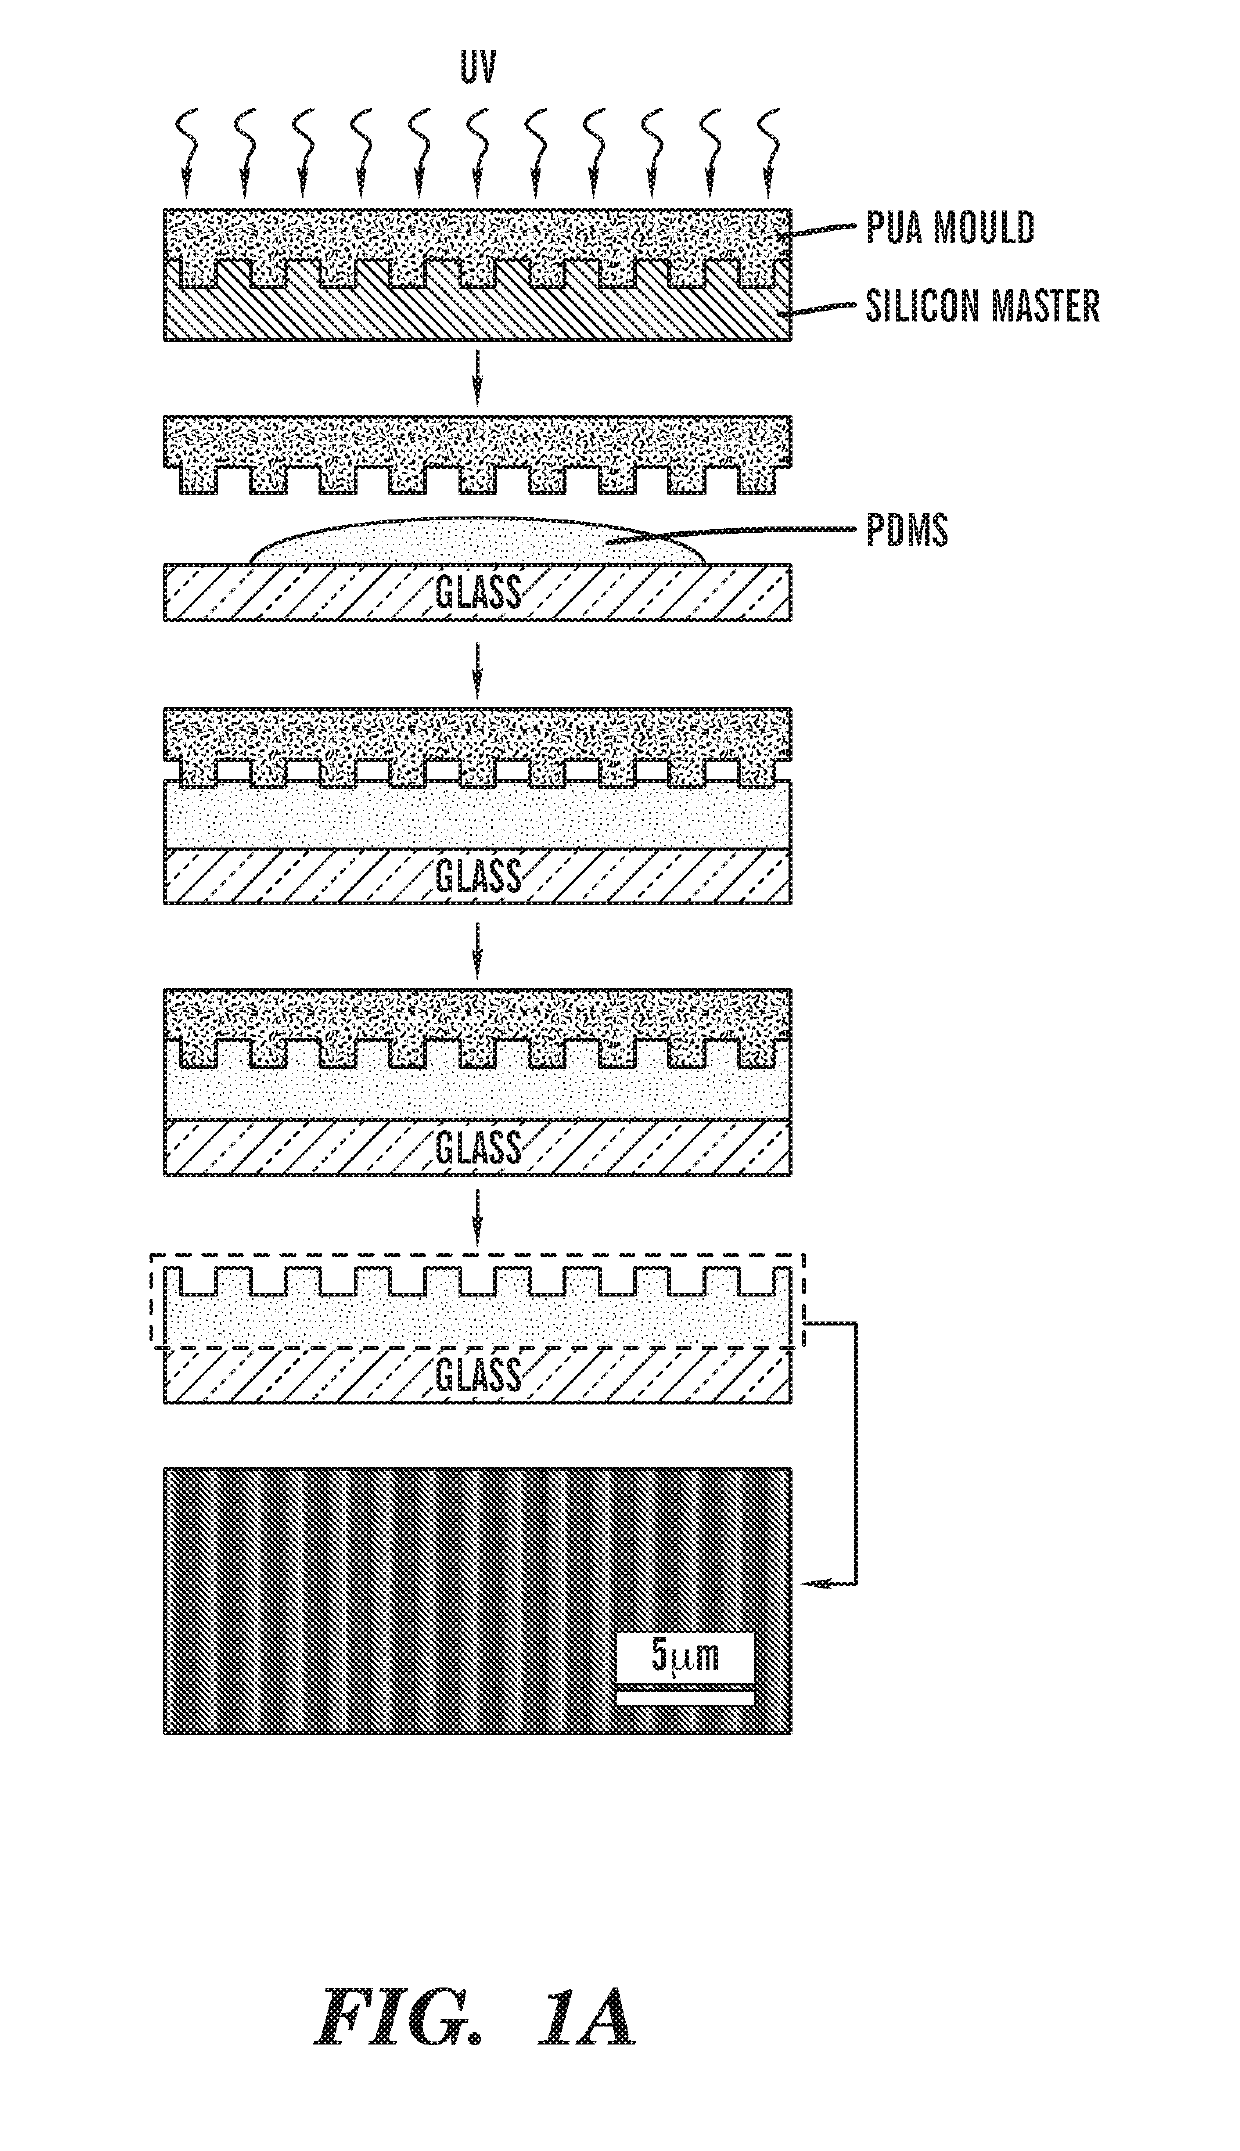 Micro- and nanopatterned substrates for cell migration and uses thereof